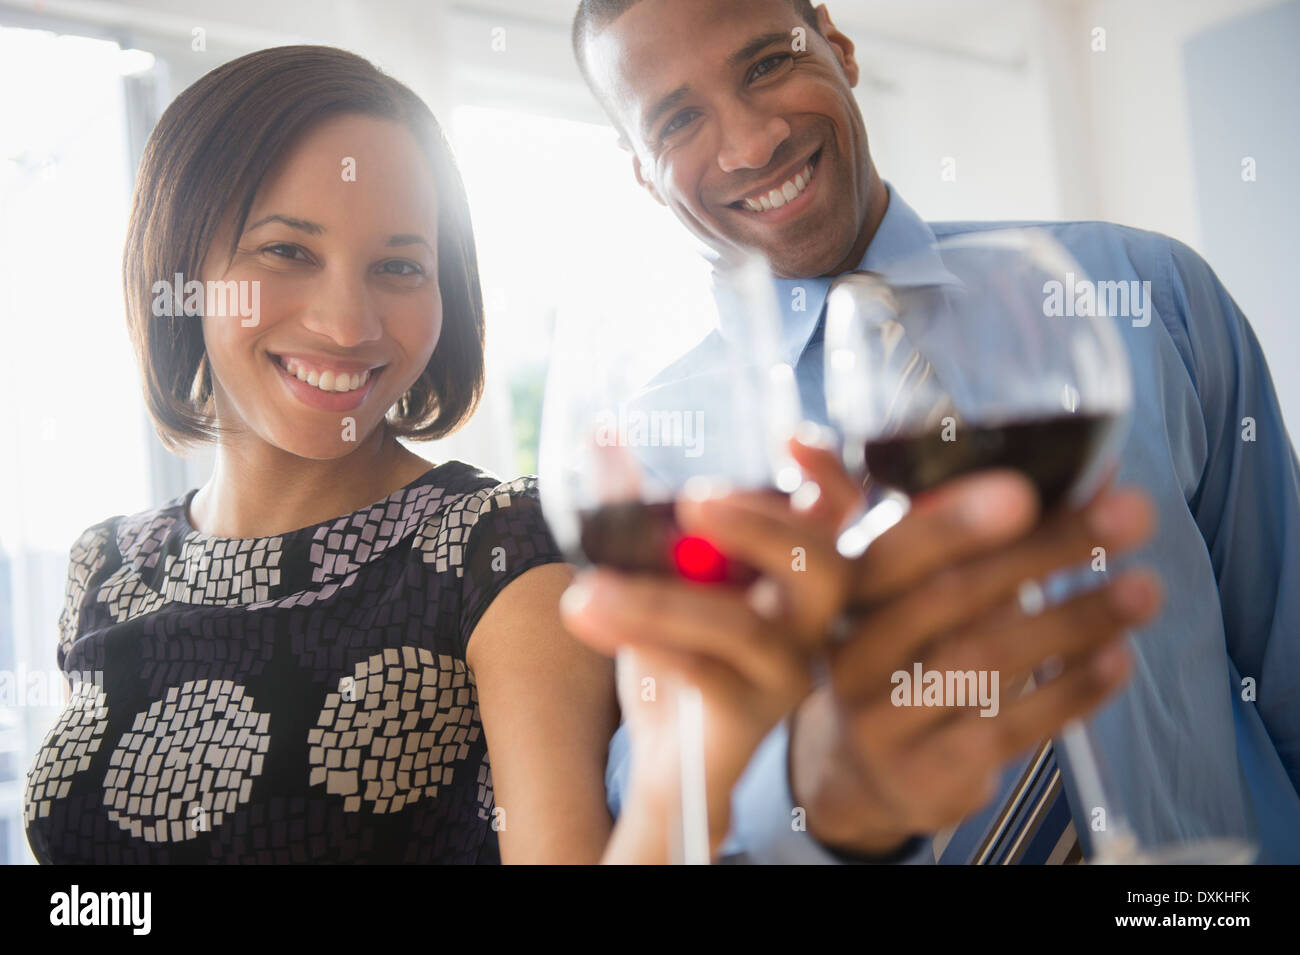 Portrait of happy couple toasting with wine glasses Banque D'Images